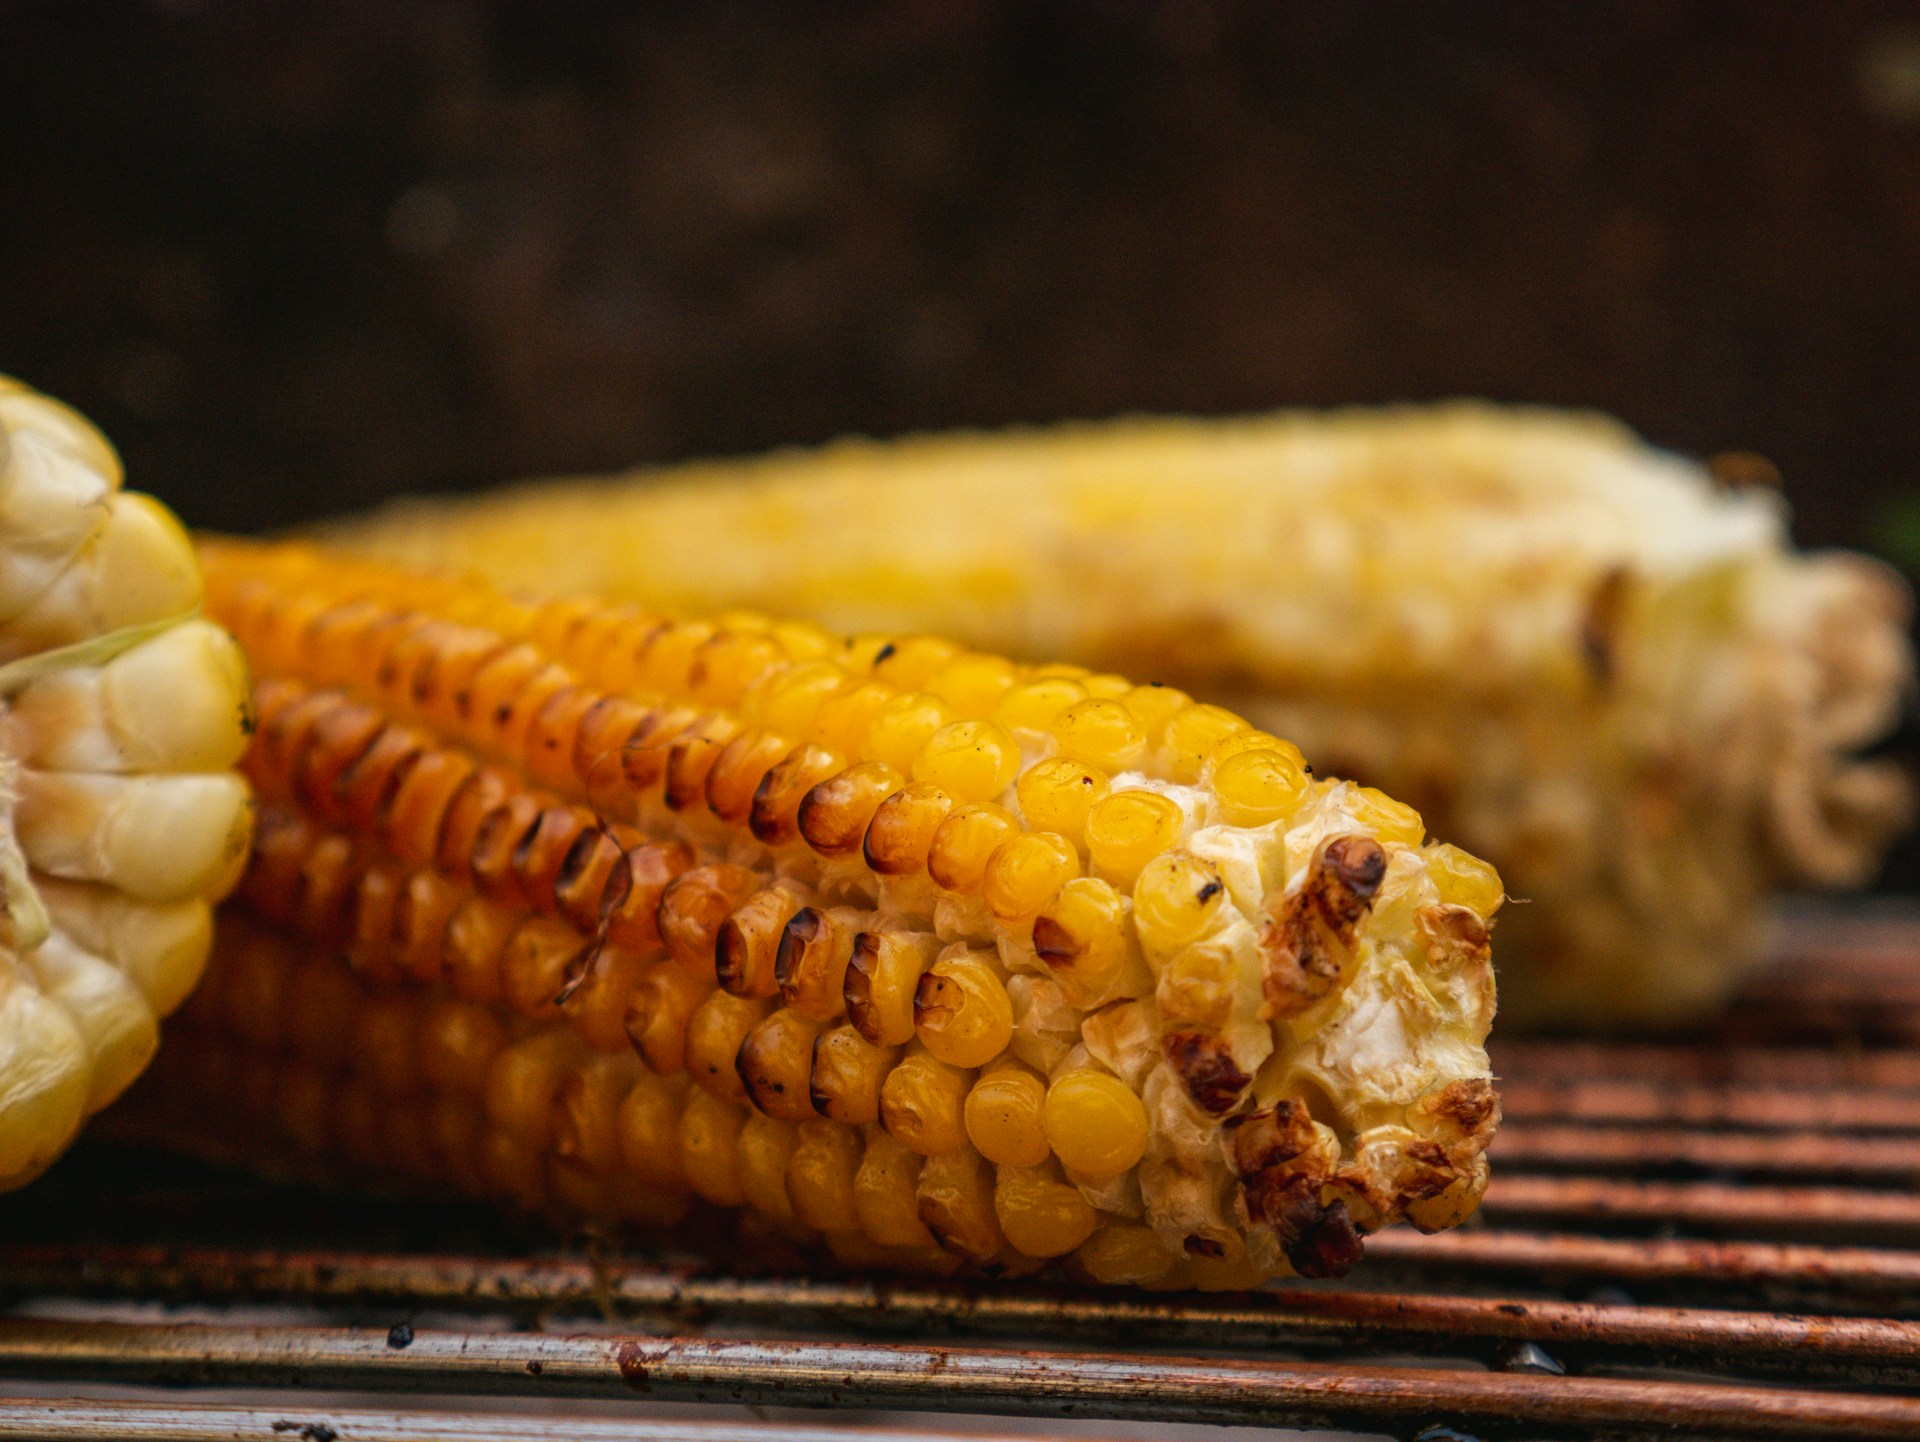 How to cook corn on the cob on the grill